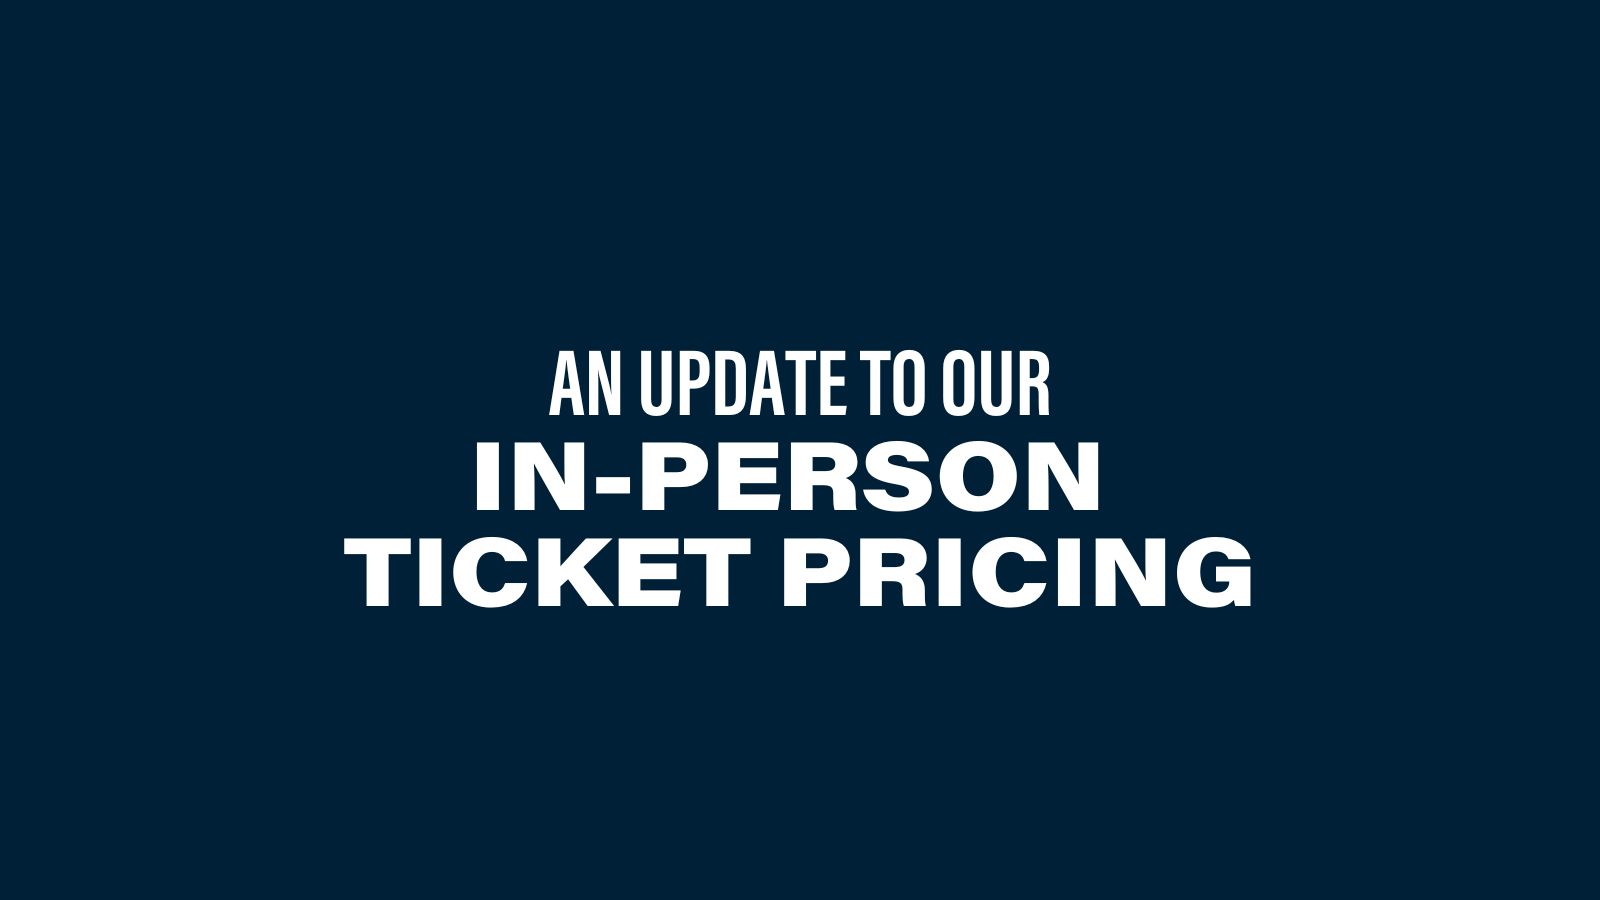 An update to our in-person ticket pricing